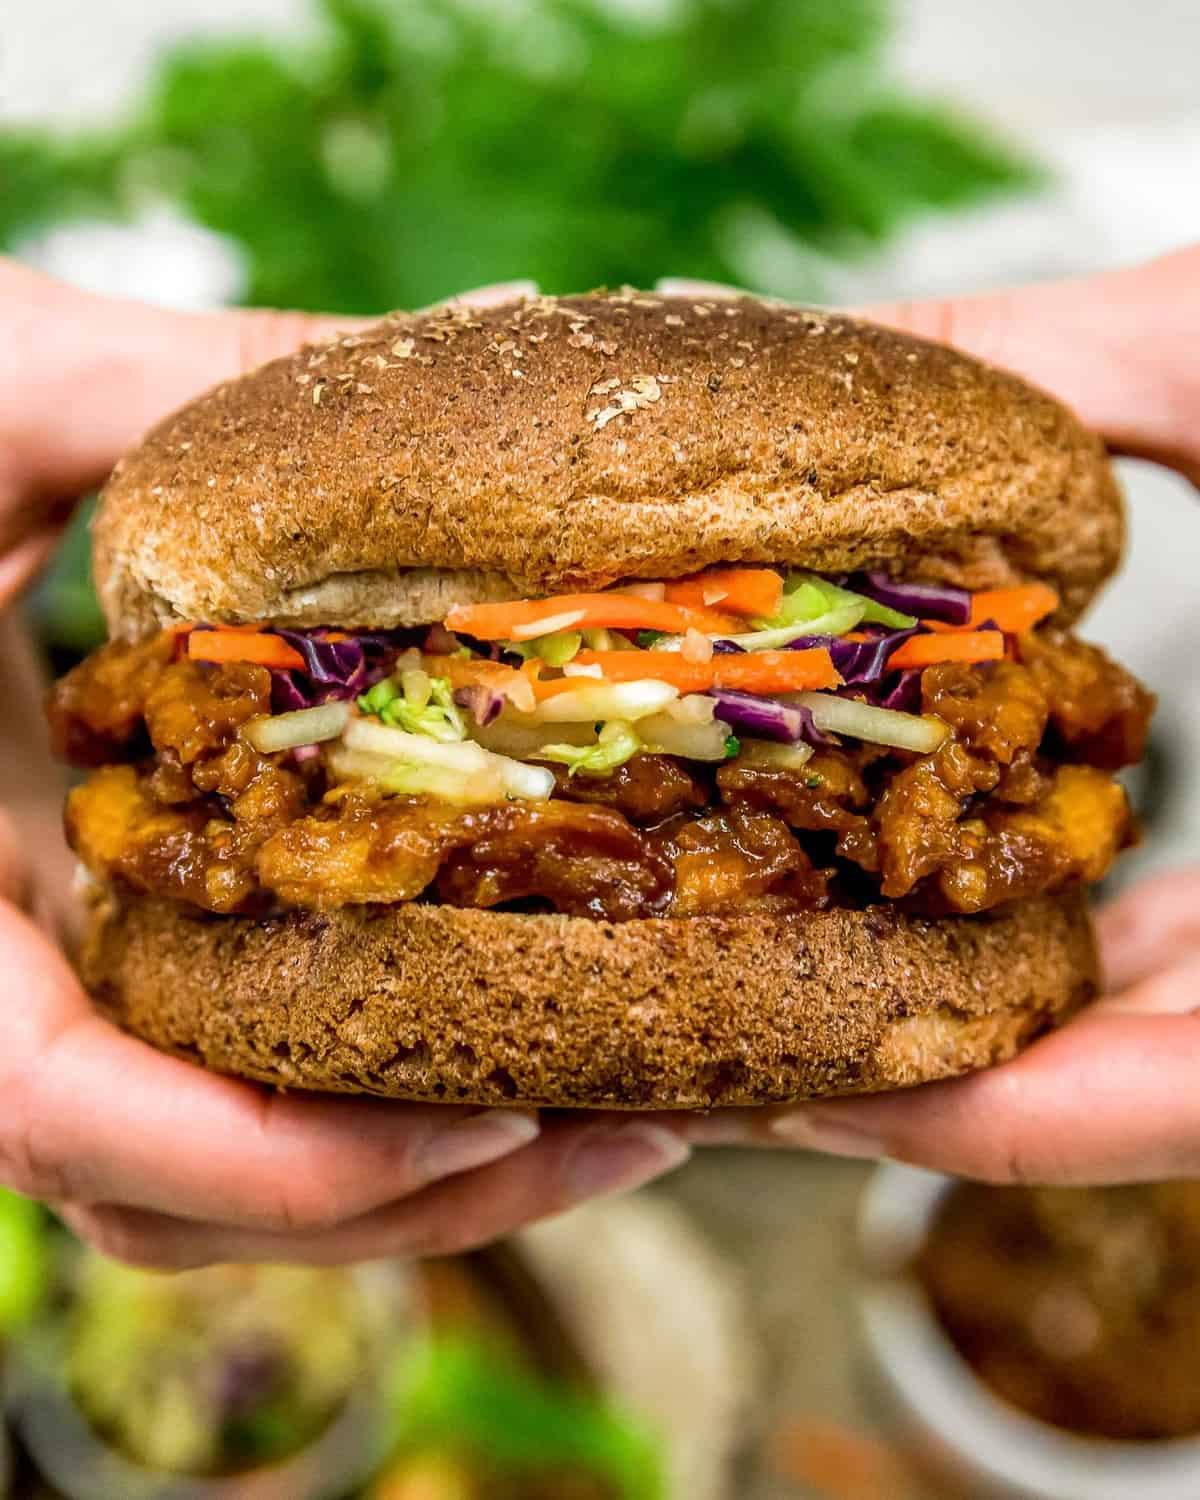 Holding Chinese Five Spice Barbecue Sauce Soy Curl Sandwich